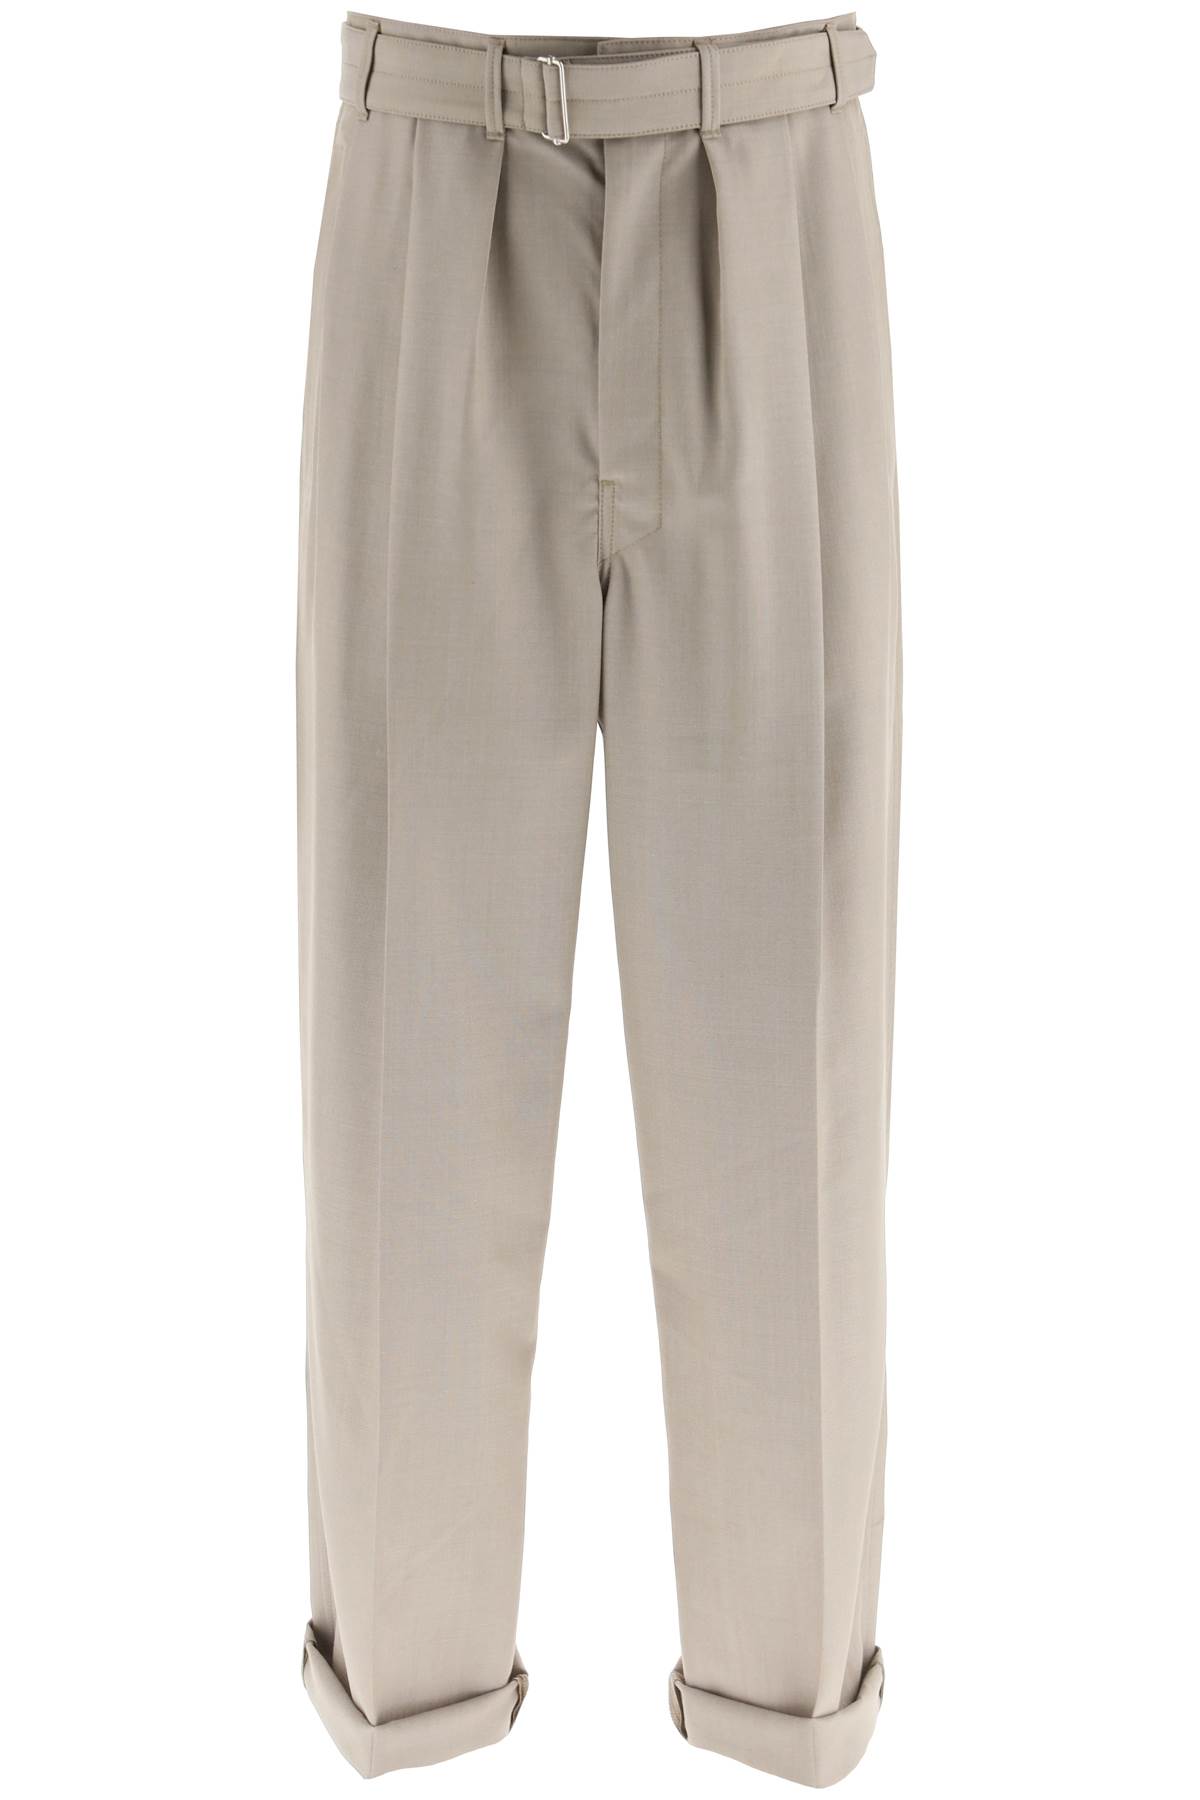 Lemaire Belted Wool Blend Trousers